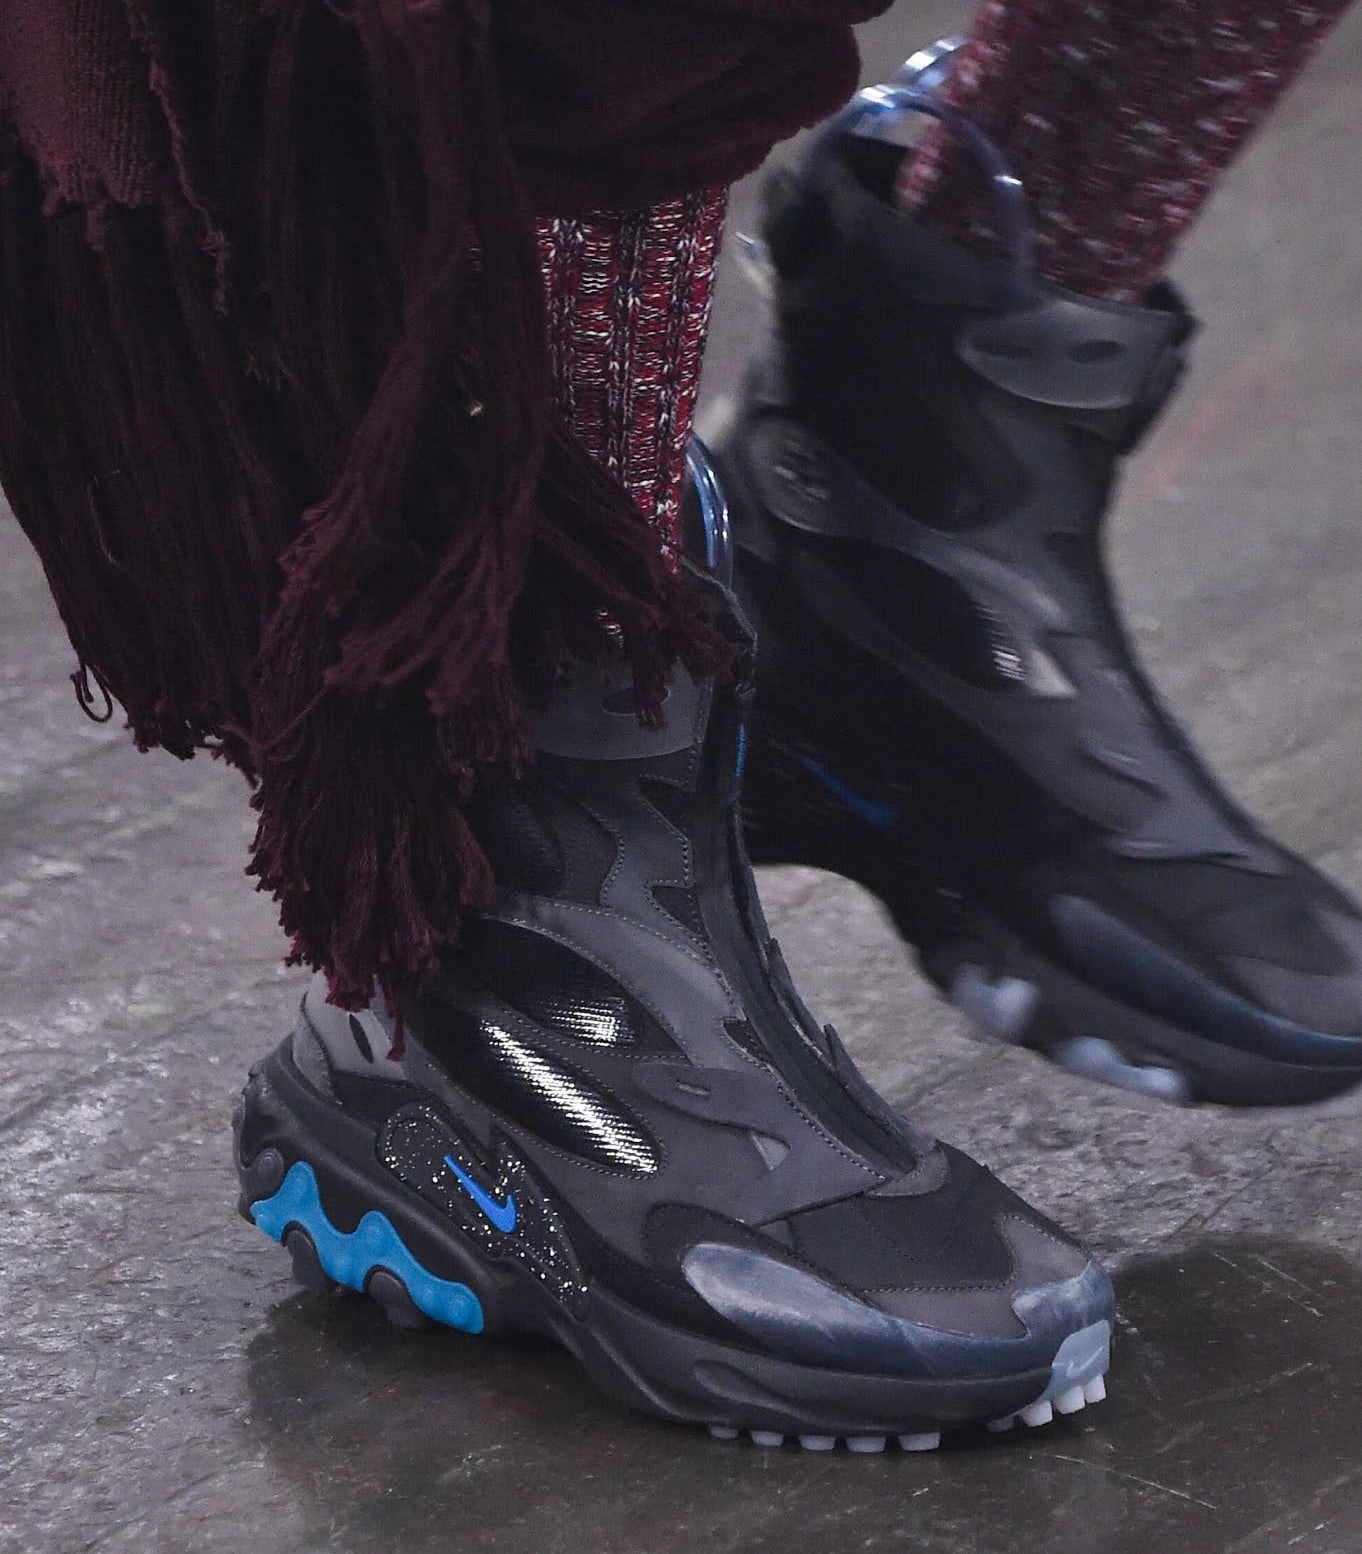 Fjord Klap Berouw Undercover Debuts More Nike Collabs at Paris Fashion Week | Complex